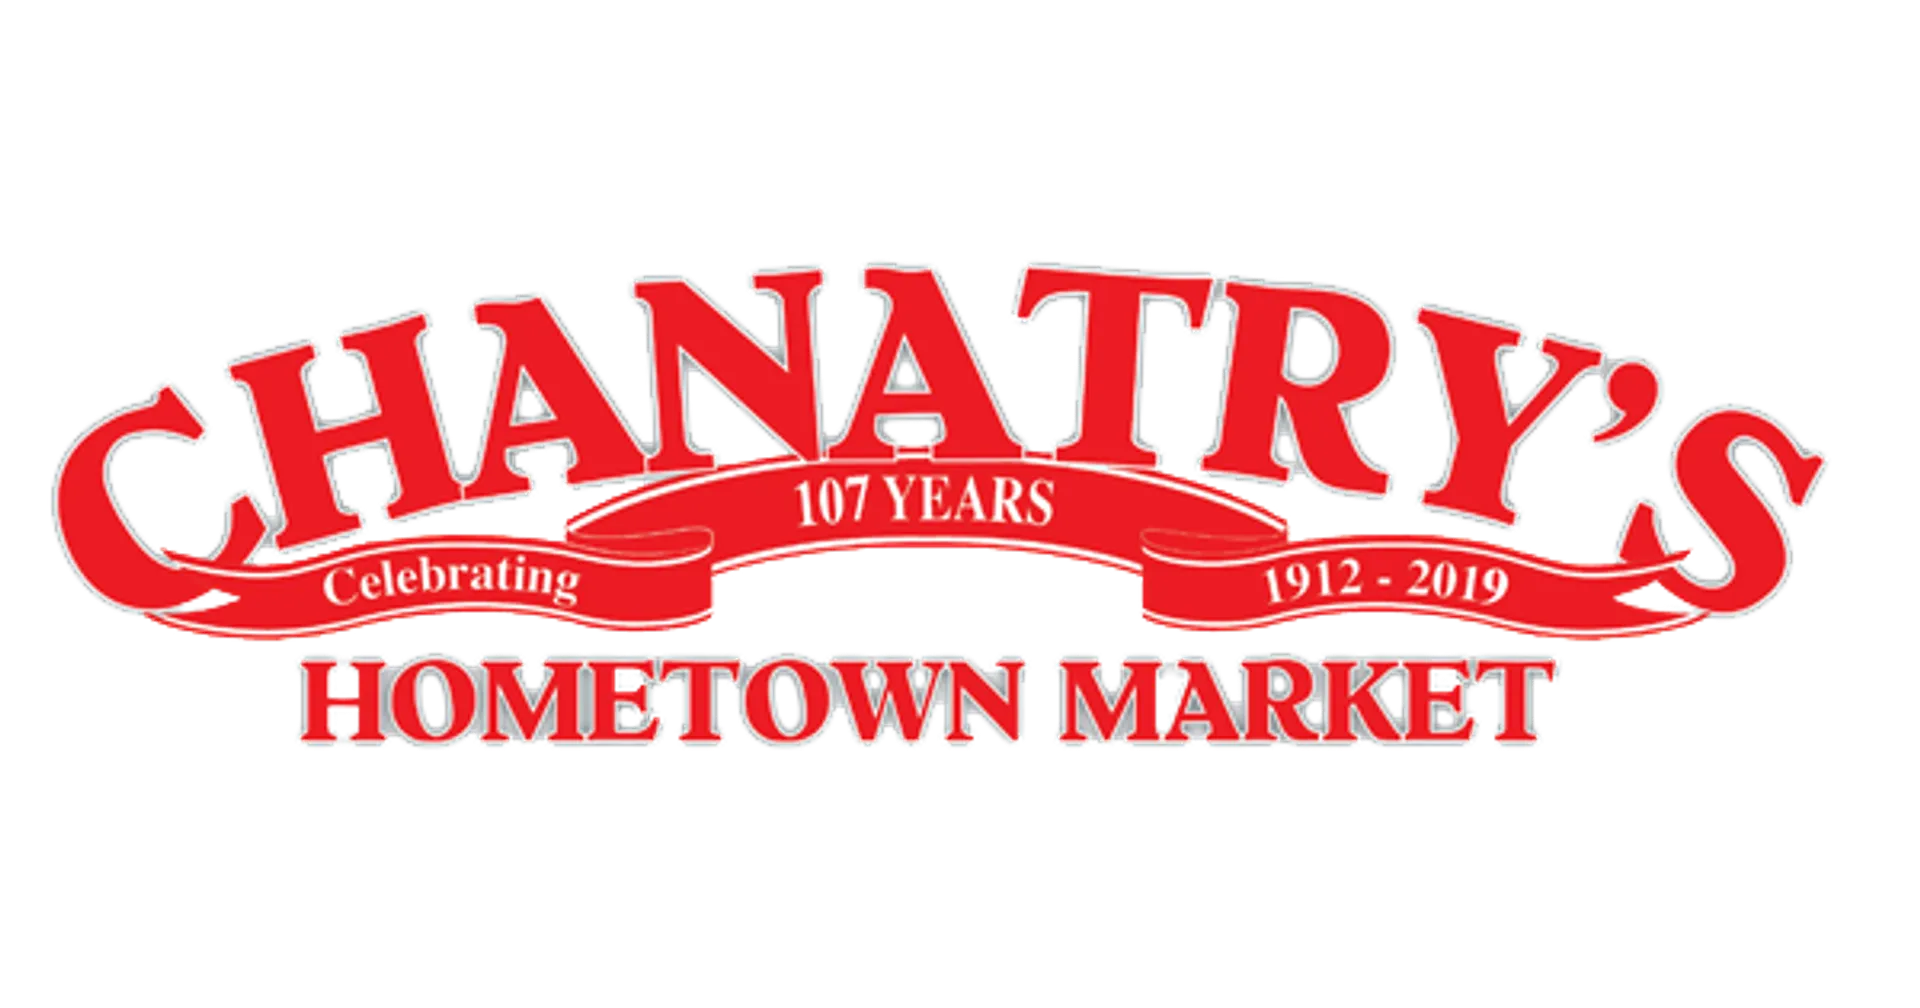 CHANATRY'S HOMETOWN MARKET logo. Current weekly ad